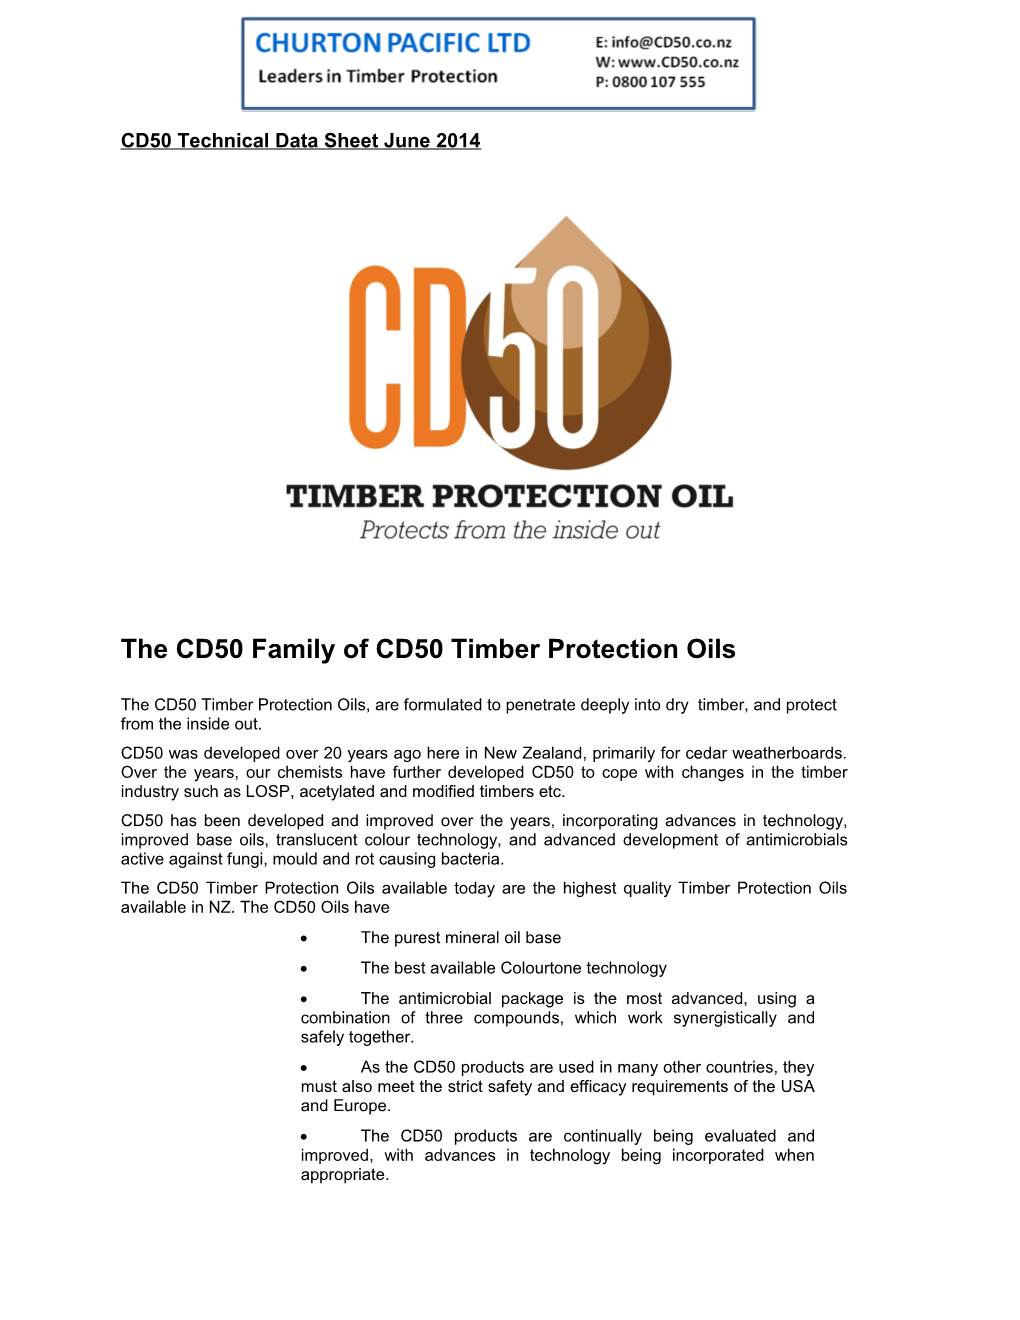 The CD50 Family of CD50 Timber Protection Oils